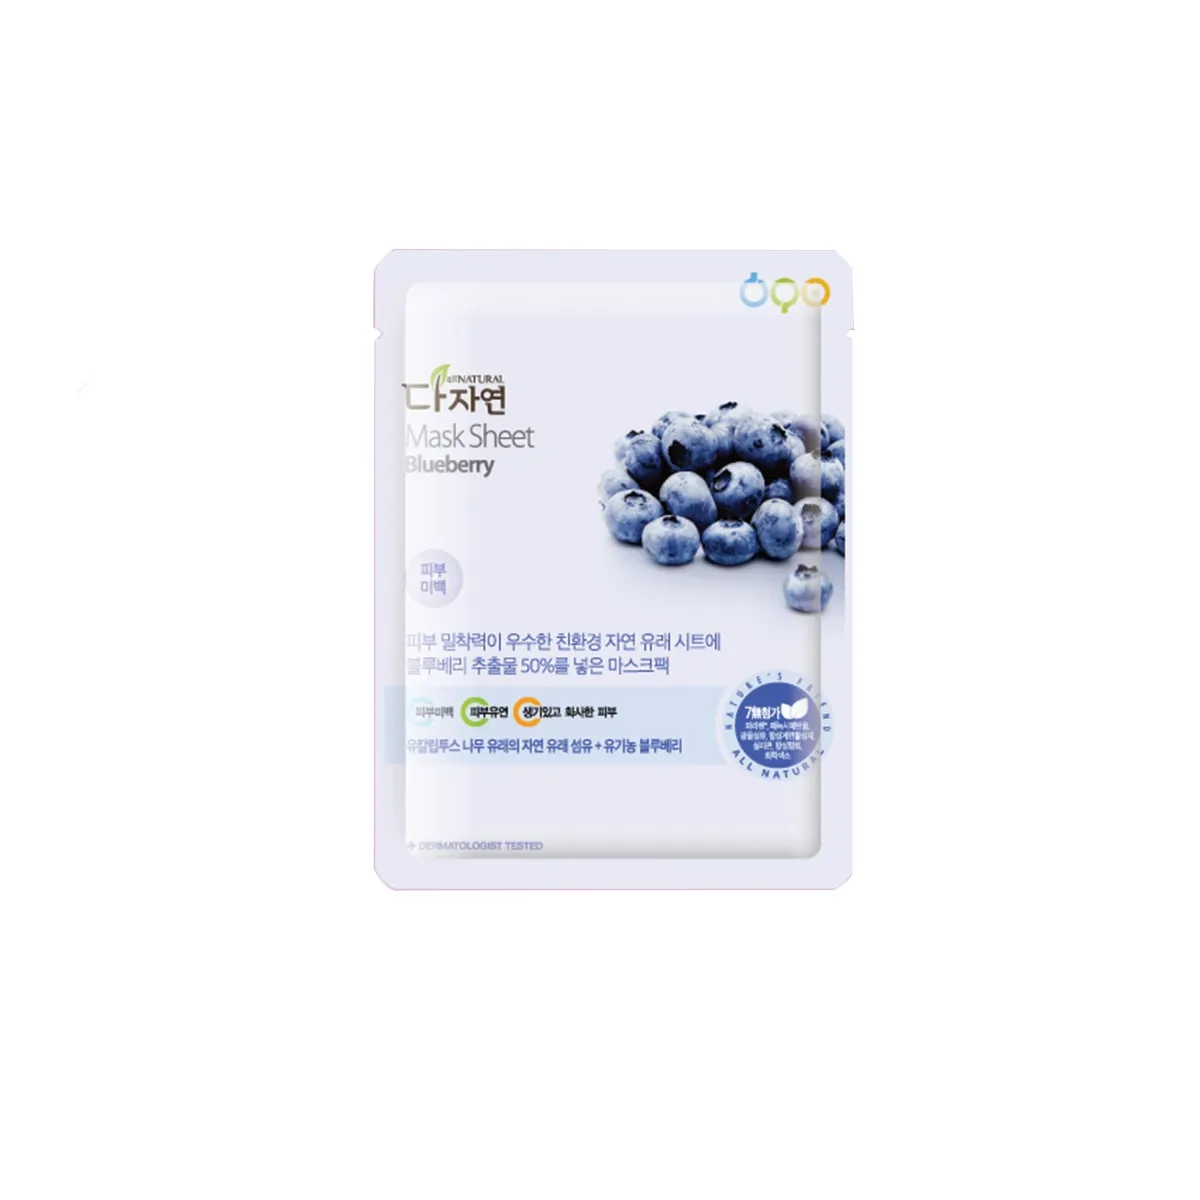 All Natural Mask Sheet Blueberry